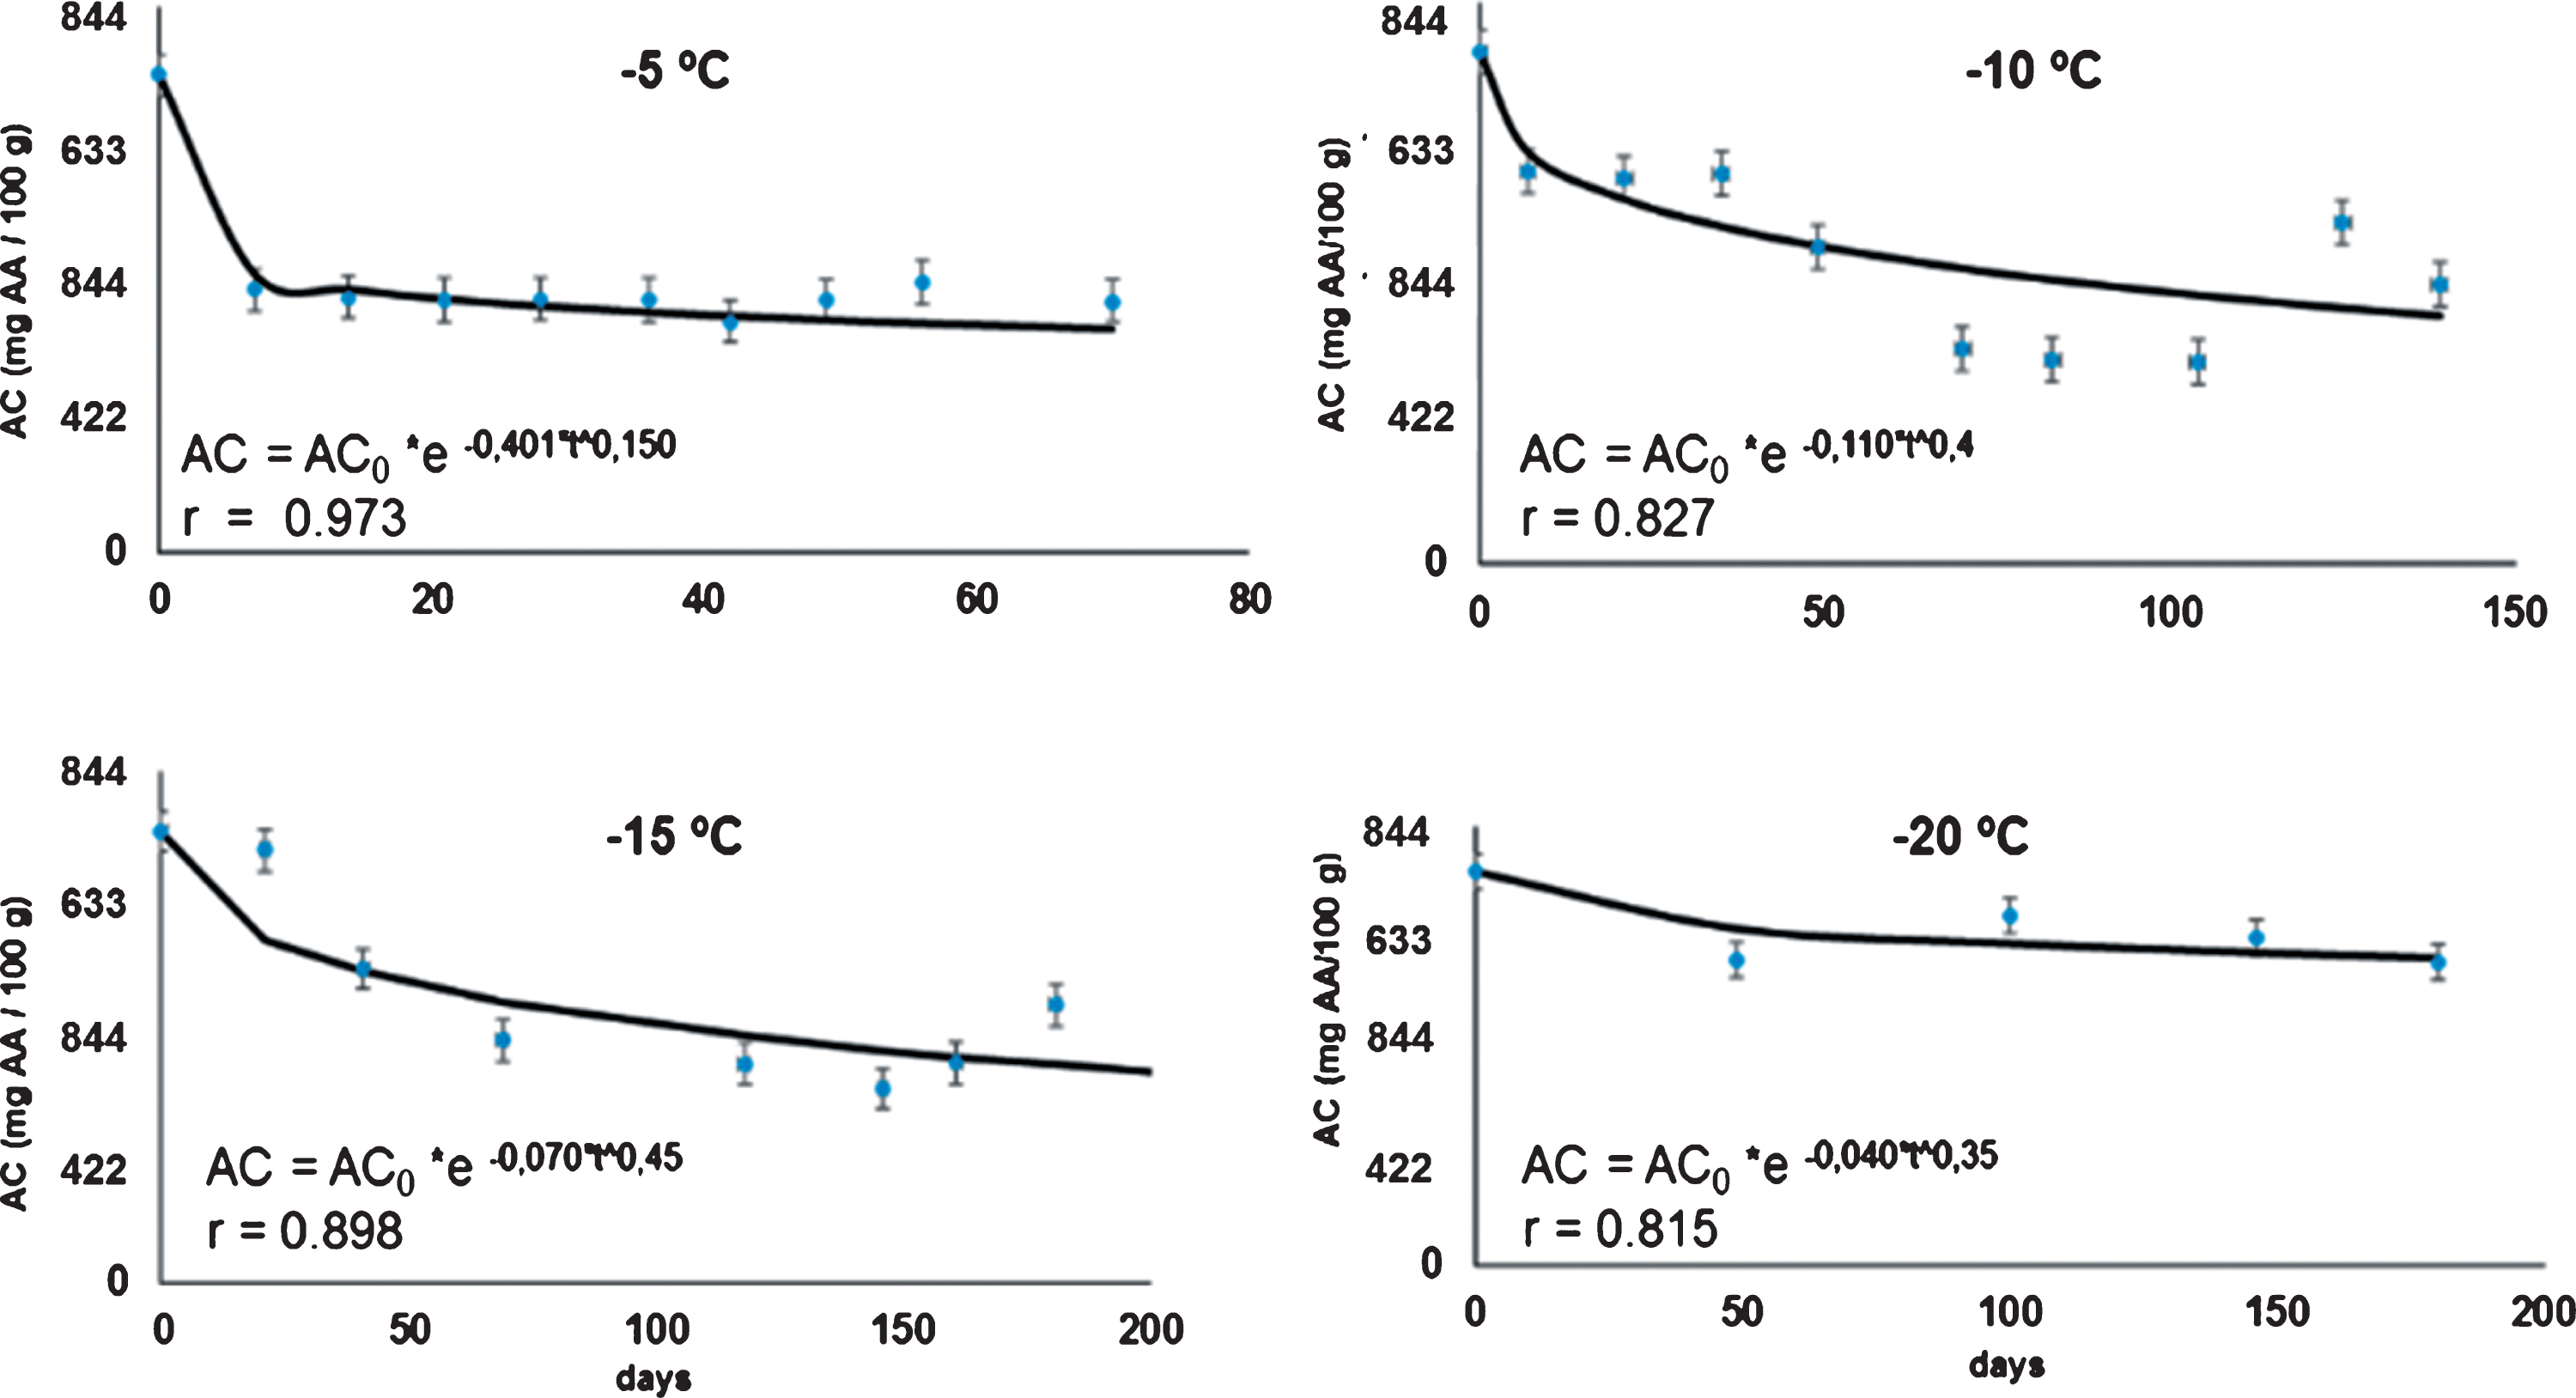 Kinetics of the antioxidant capacity (AC in mg AA/100 g DW) in rose hip pulp, fit to the Weibull model at 4 frozen storage temperatures.